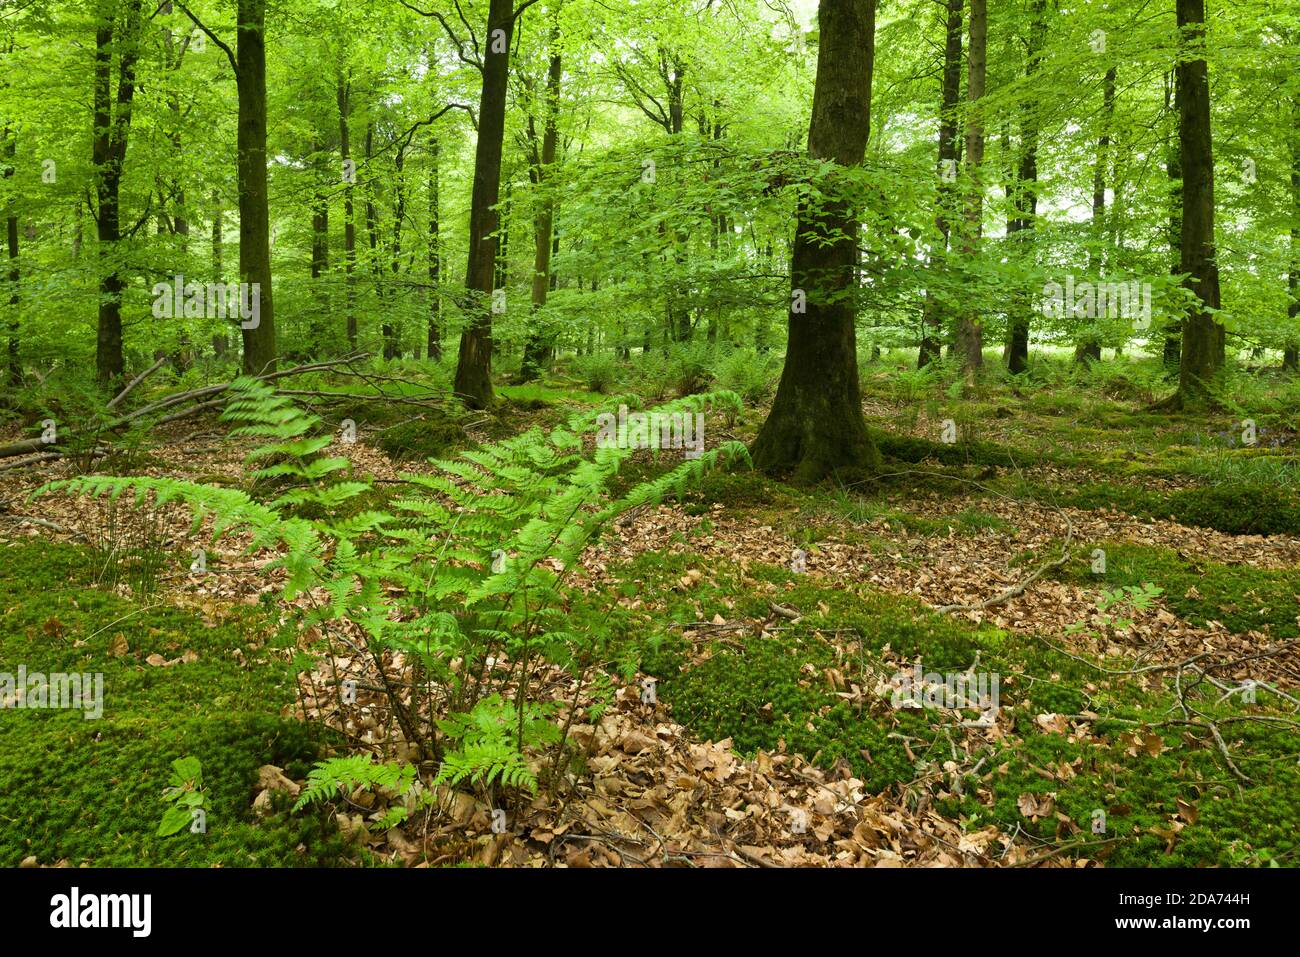 Broad Buckler Fern (Dryopteris dilatata) in a beech woodland in spring at Stockhill Wood in the Mendip Hills, Somerset, England. Stock Photo